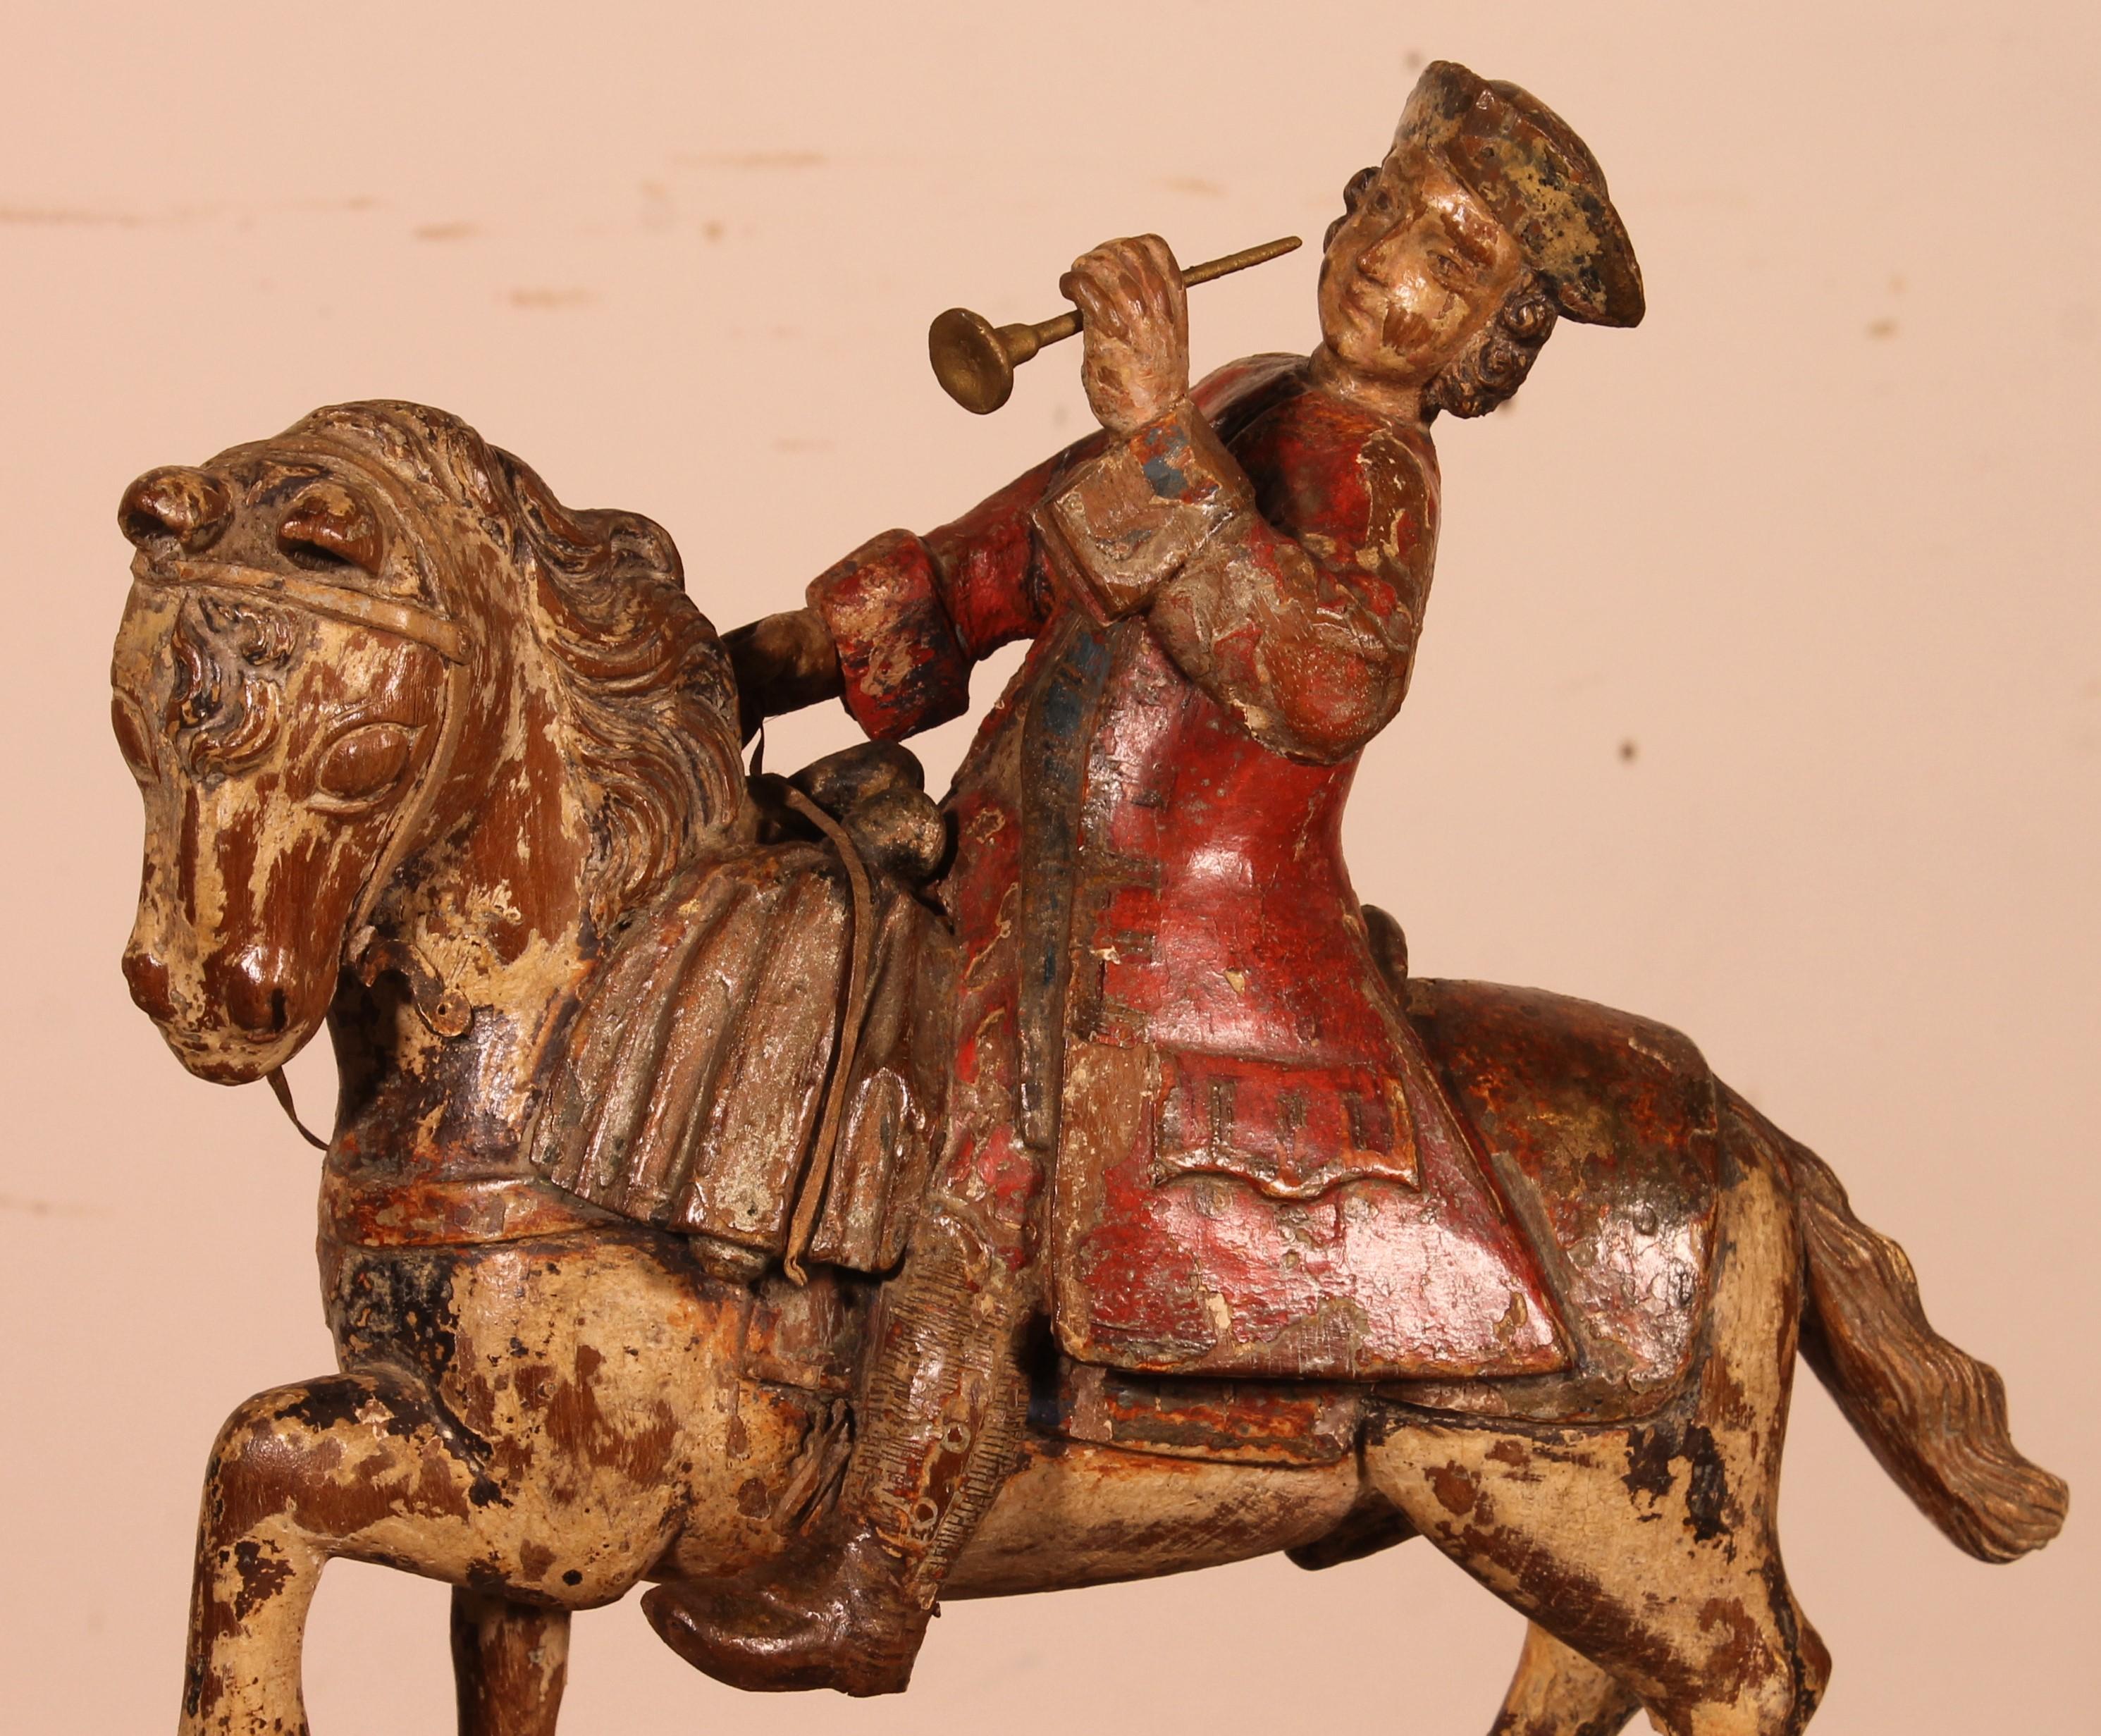 Superb horseman from the 18th century - France
Very beautiful rare subject which probably represents a horseman during a hunt
Very good quality of sculpture
Superb original polychromy
Superb patina and in very good condition
Measure: Height